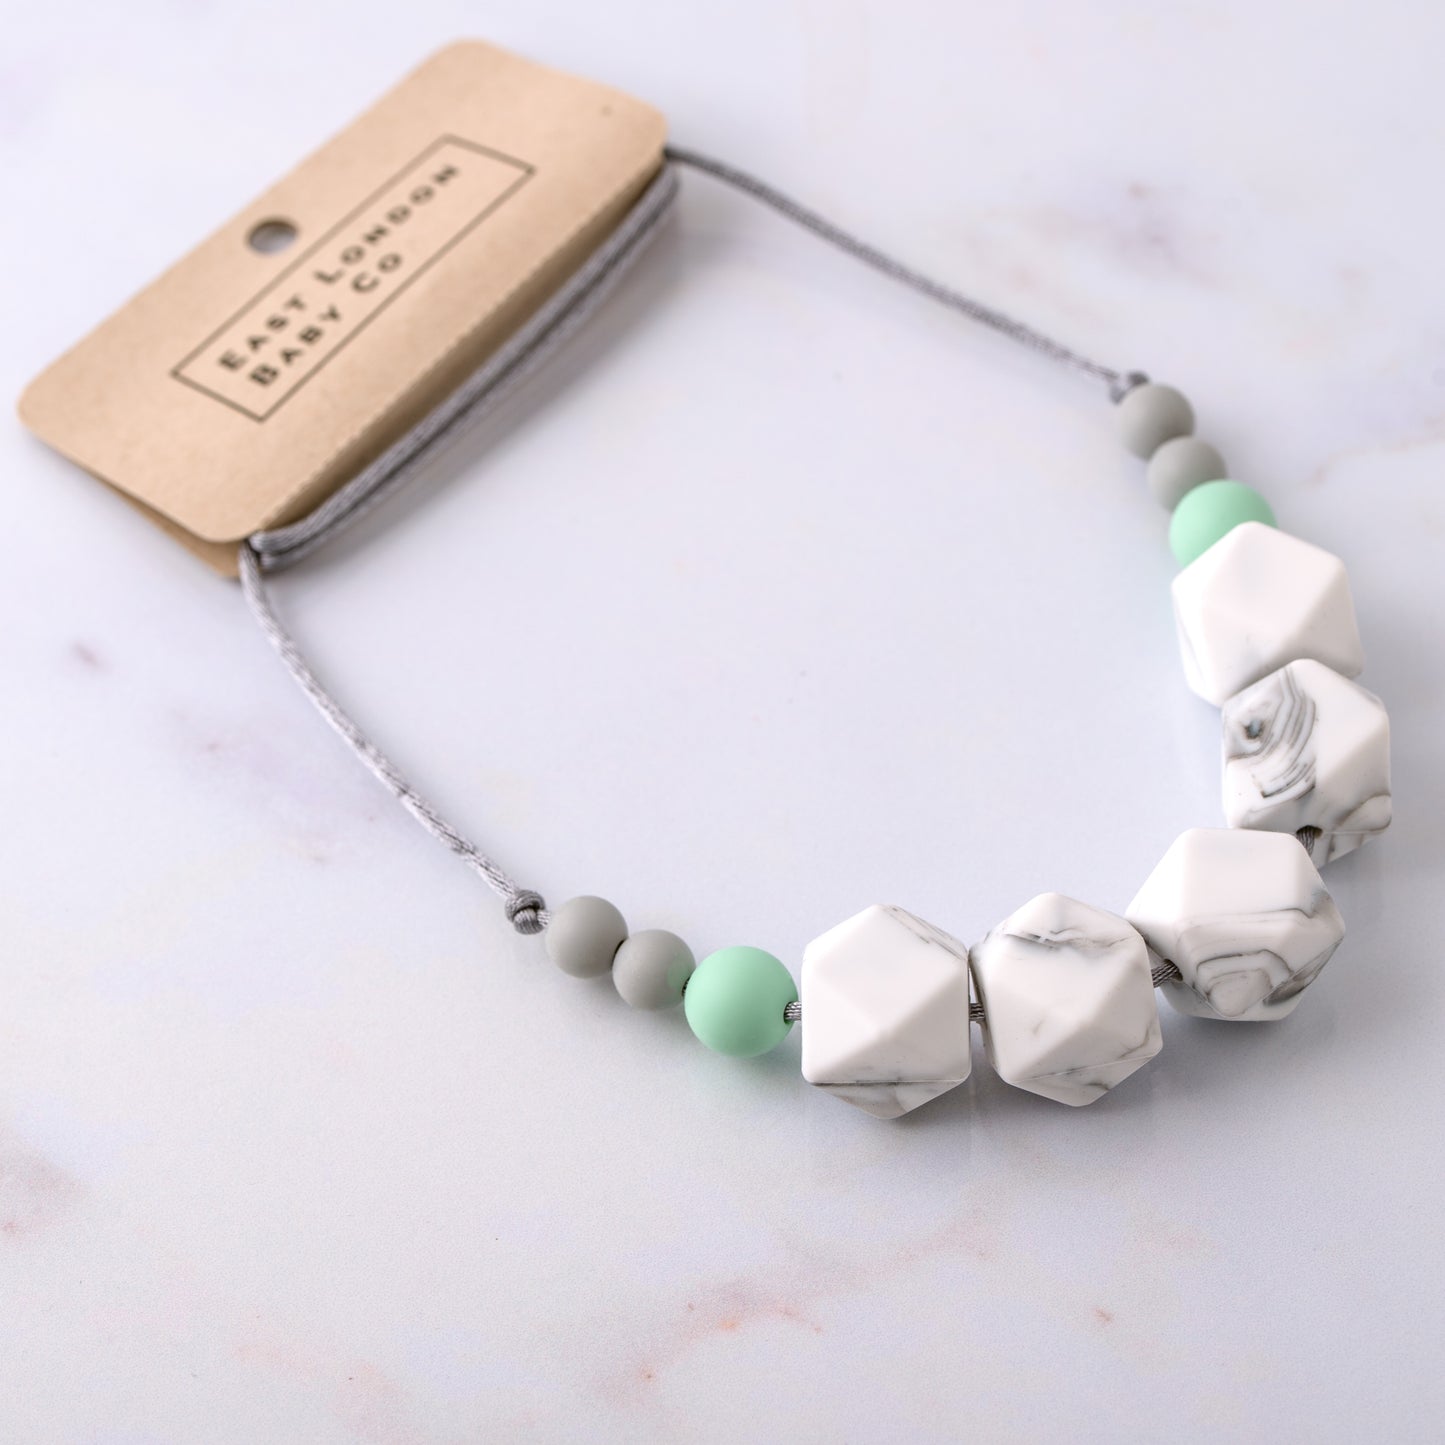 Dalston Teething Necklace